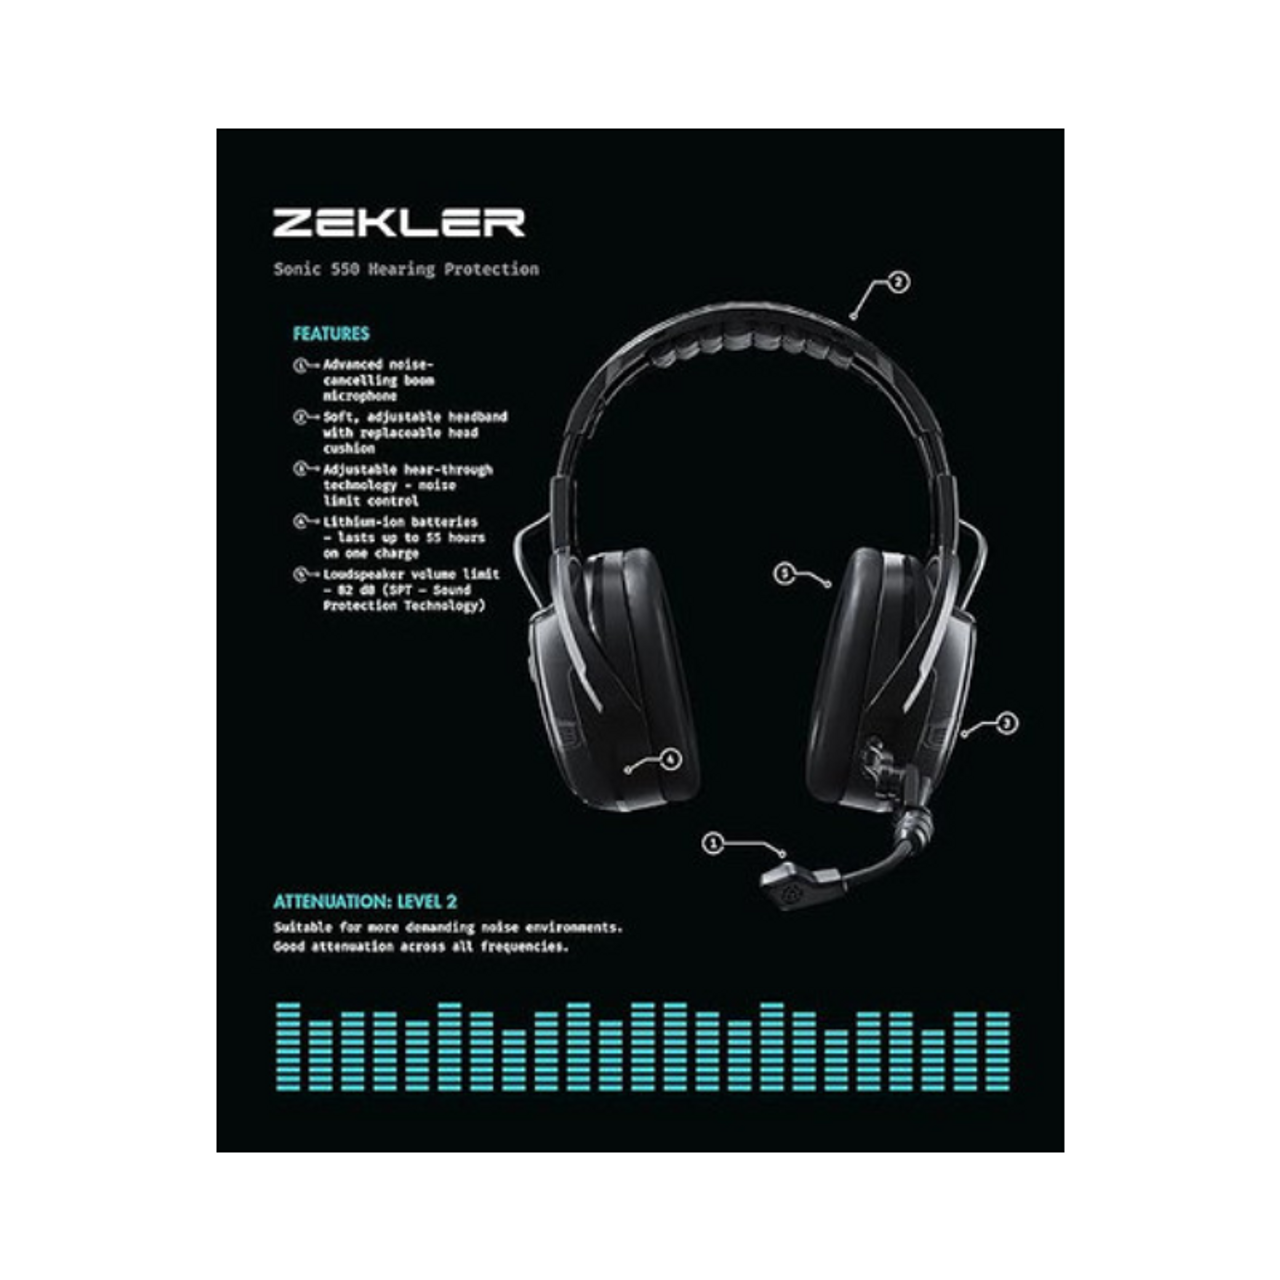 ZEKLER Ear Muffs | SONIC 550 Class 2 with Boom Microphone, Active Monitoring, Bluetooth Earmuffs  for Over Head, Workshops, Machinery Operator, Riggers, Trade Supplies and Electricians